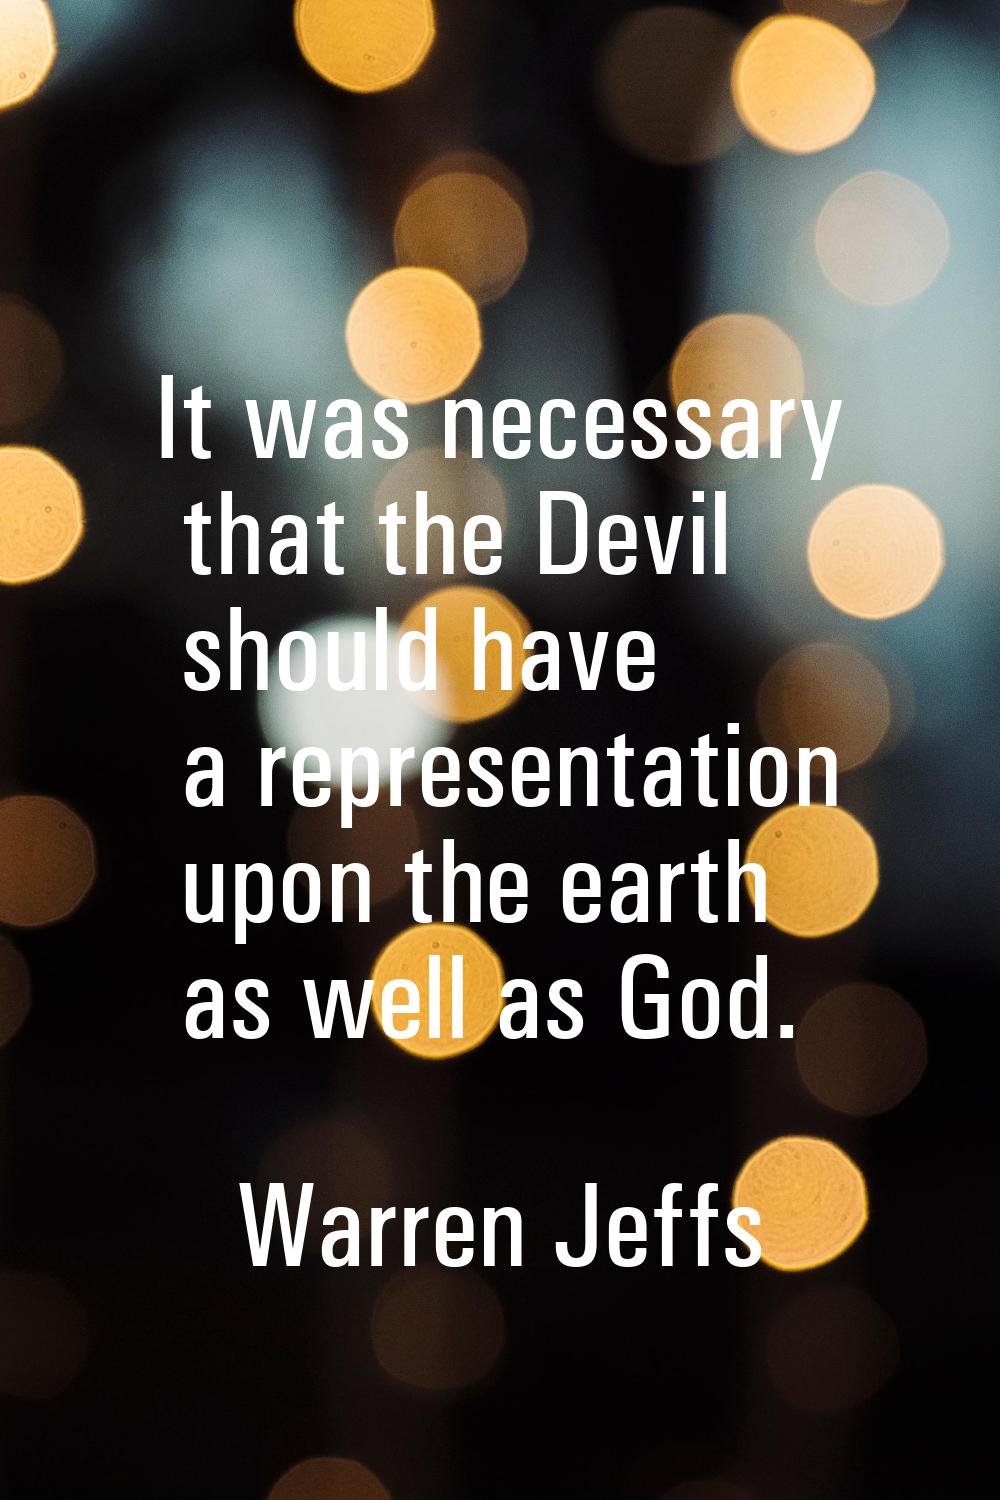 It was necessary that the Devil should have a representation upon the earth as well as God.